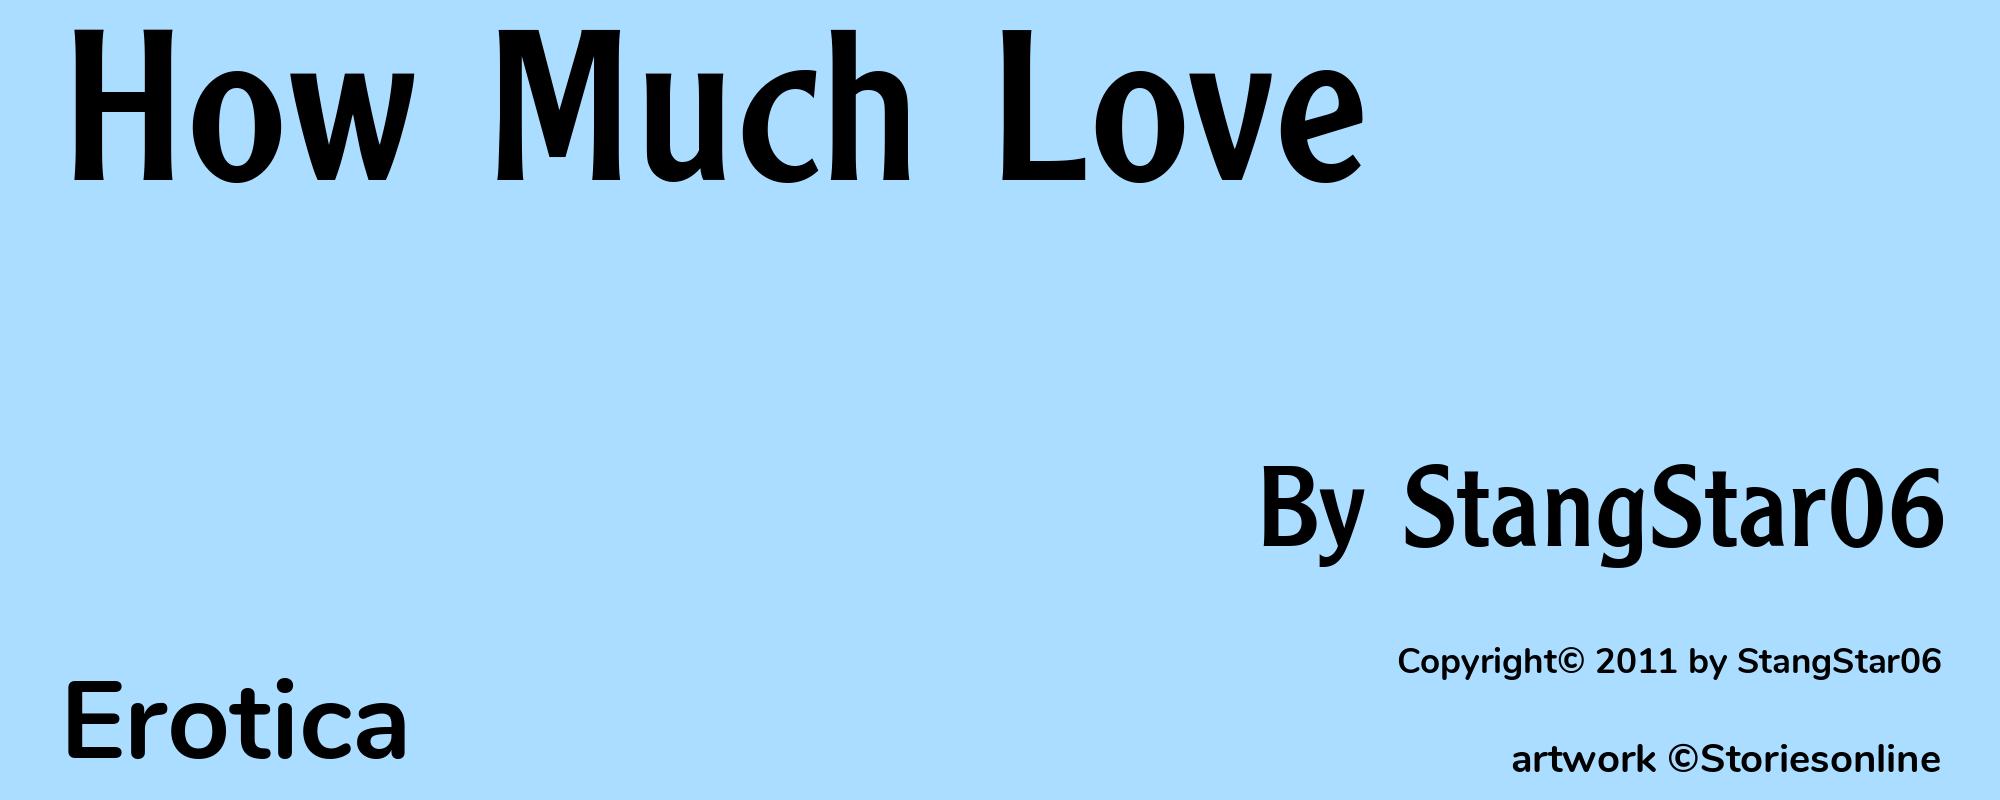 How Much Love - Cover